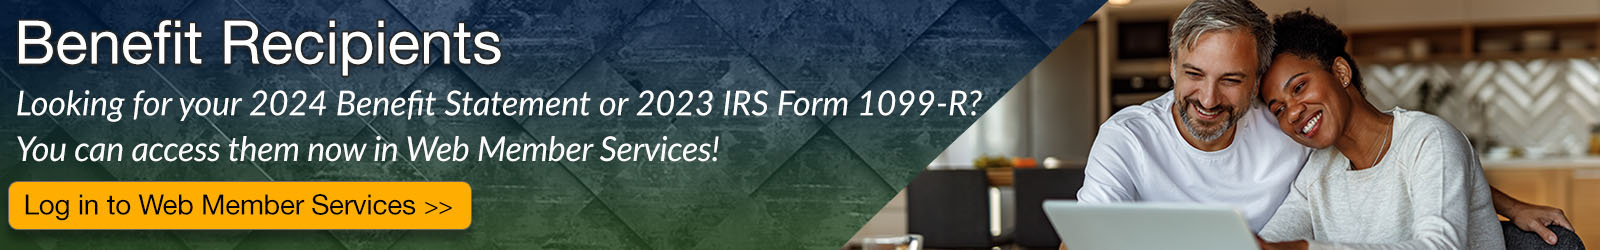 Benefit recipients, your 2024 Benefit Statement and 2023 IRS form 1099-R is now available in Web Member Services.